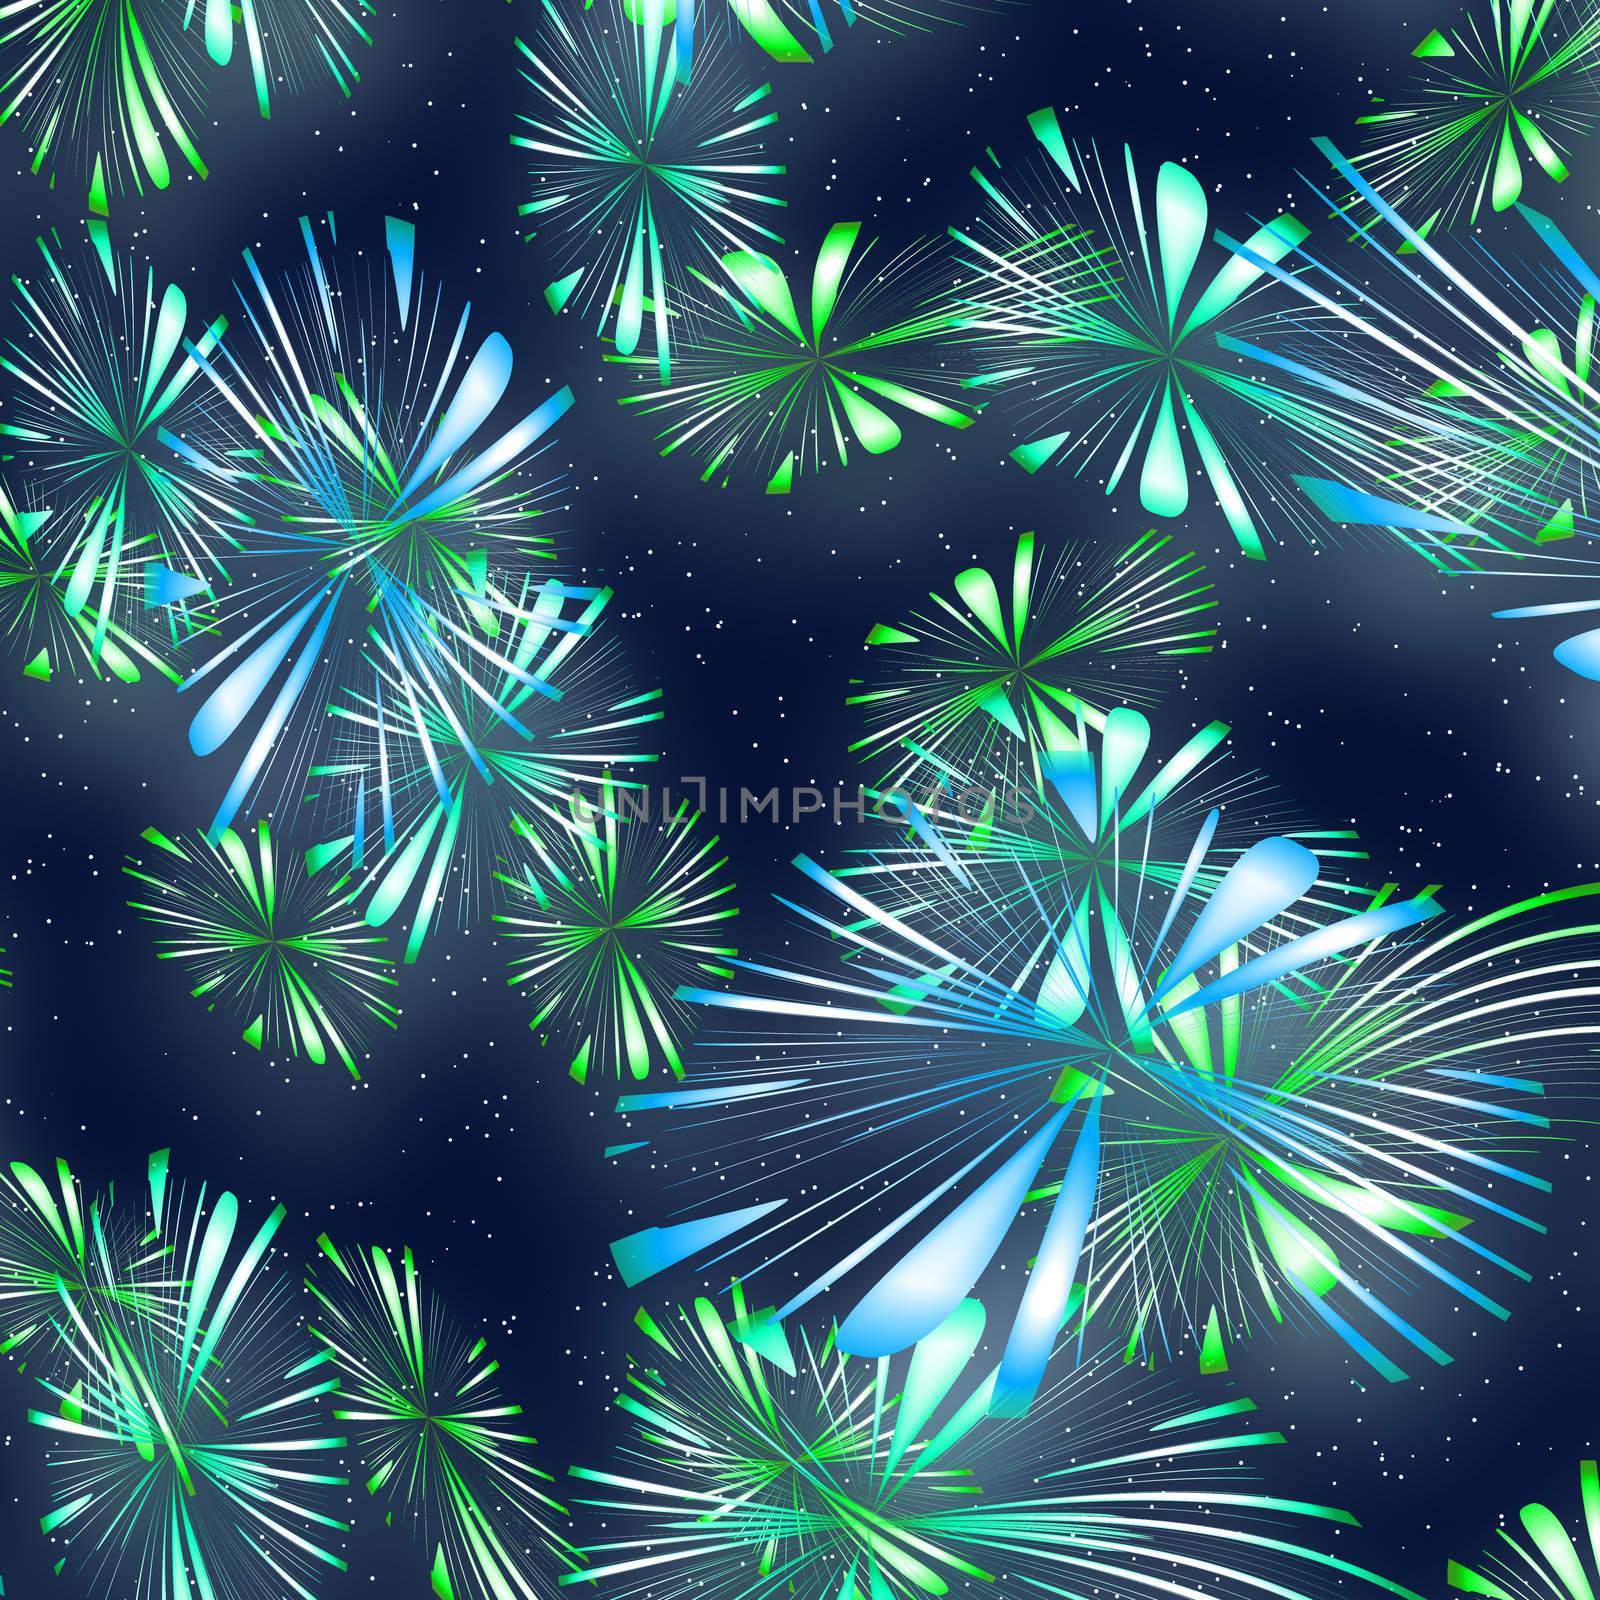 a nice illustration of bright and colourful fireworks